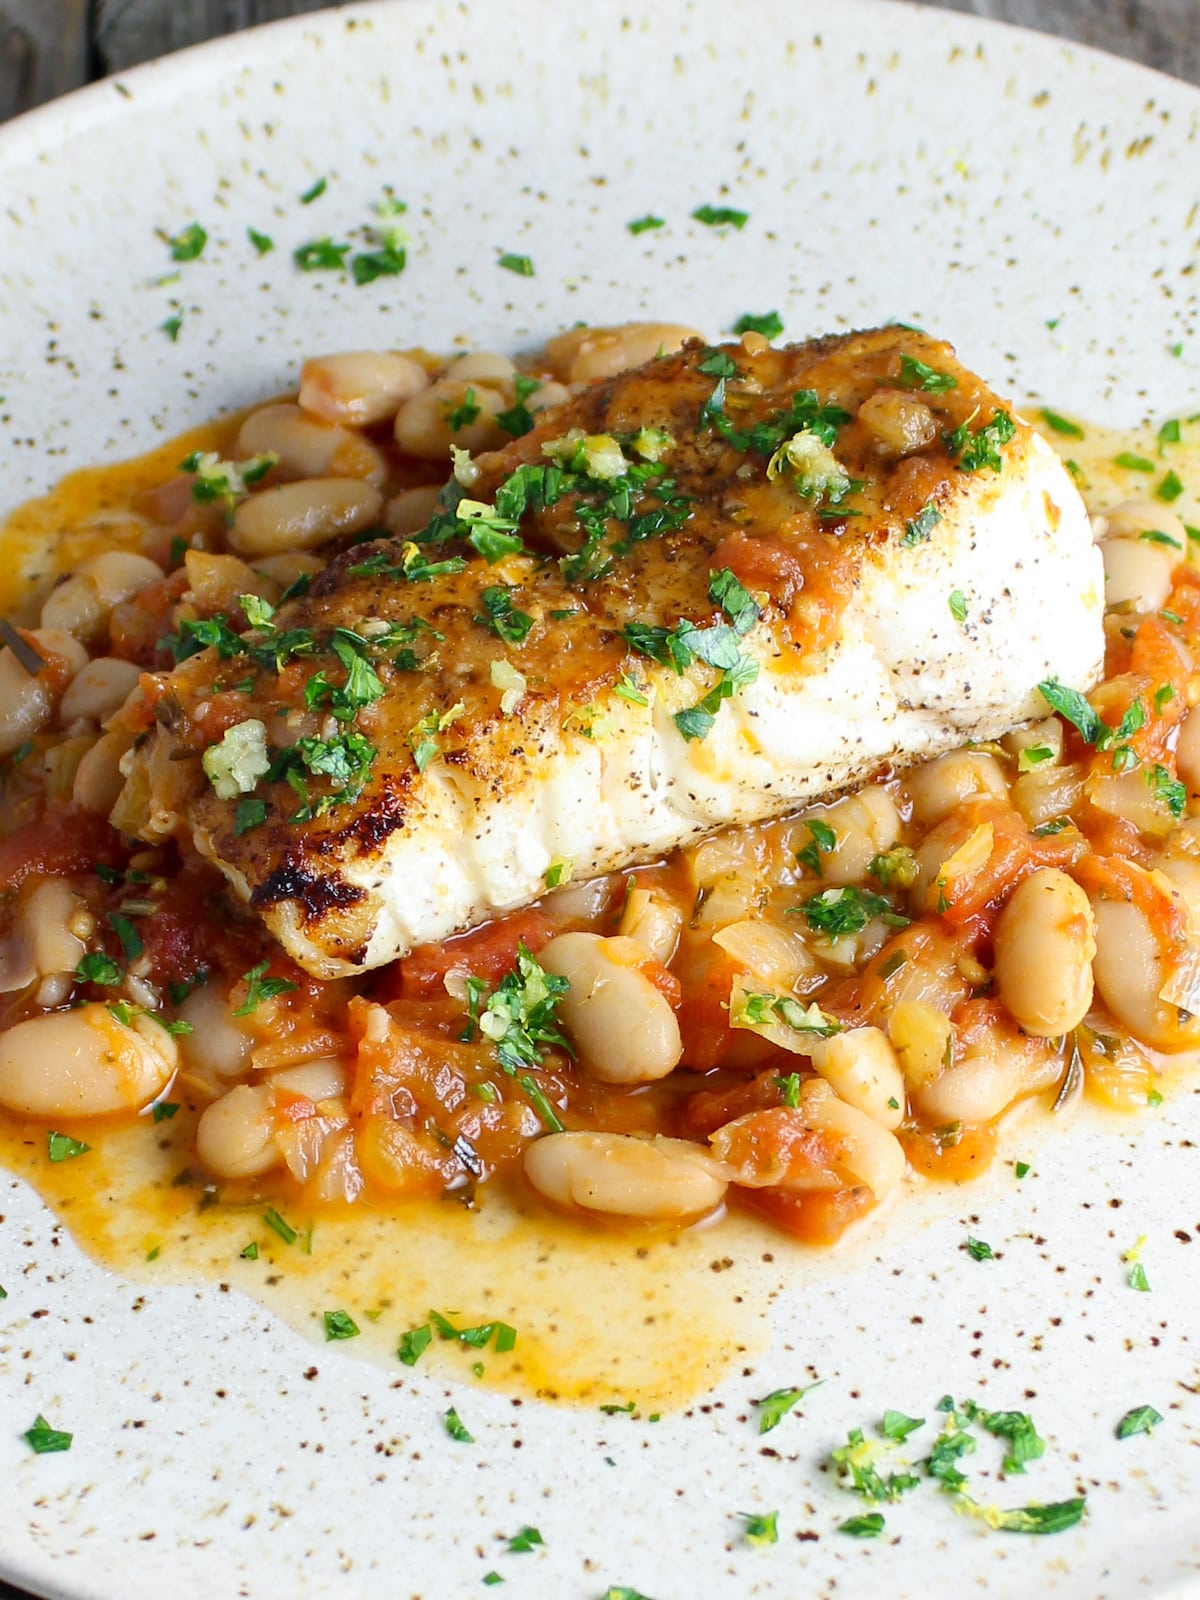 One piece of Pan Seared Halibut on a plate with sauteed tomatoes and cannellini beans.